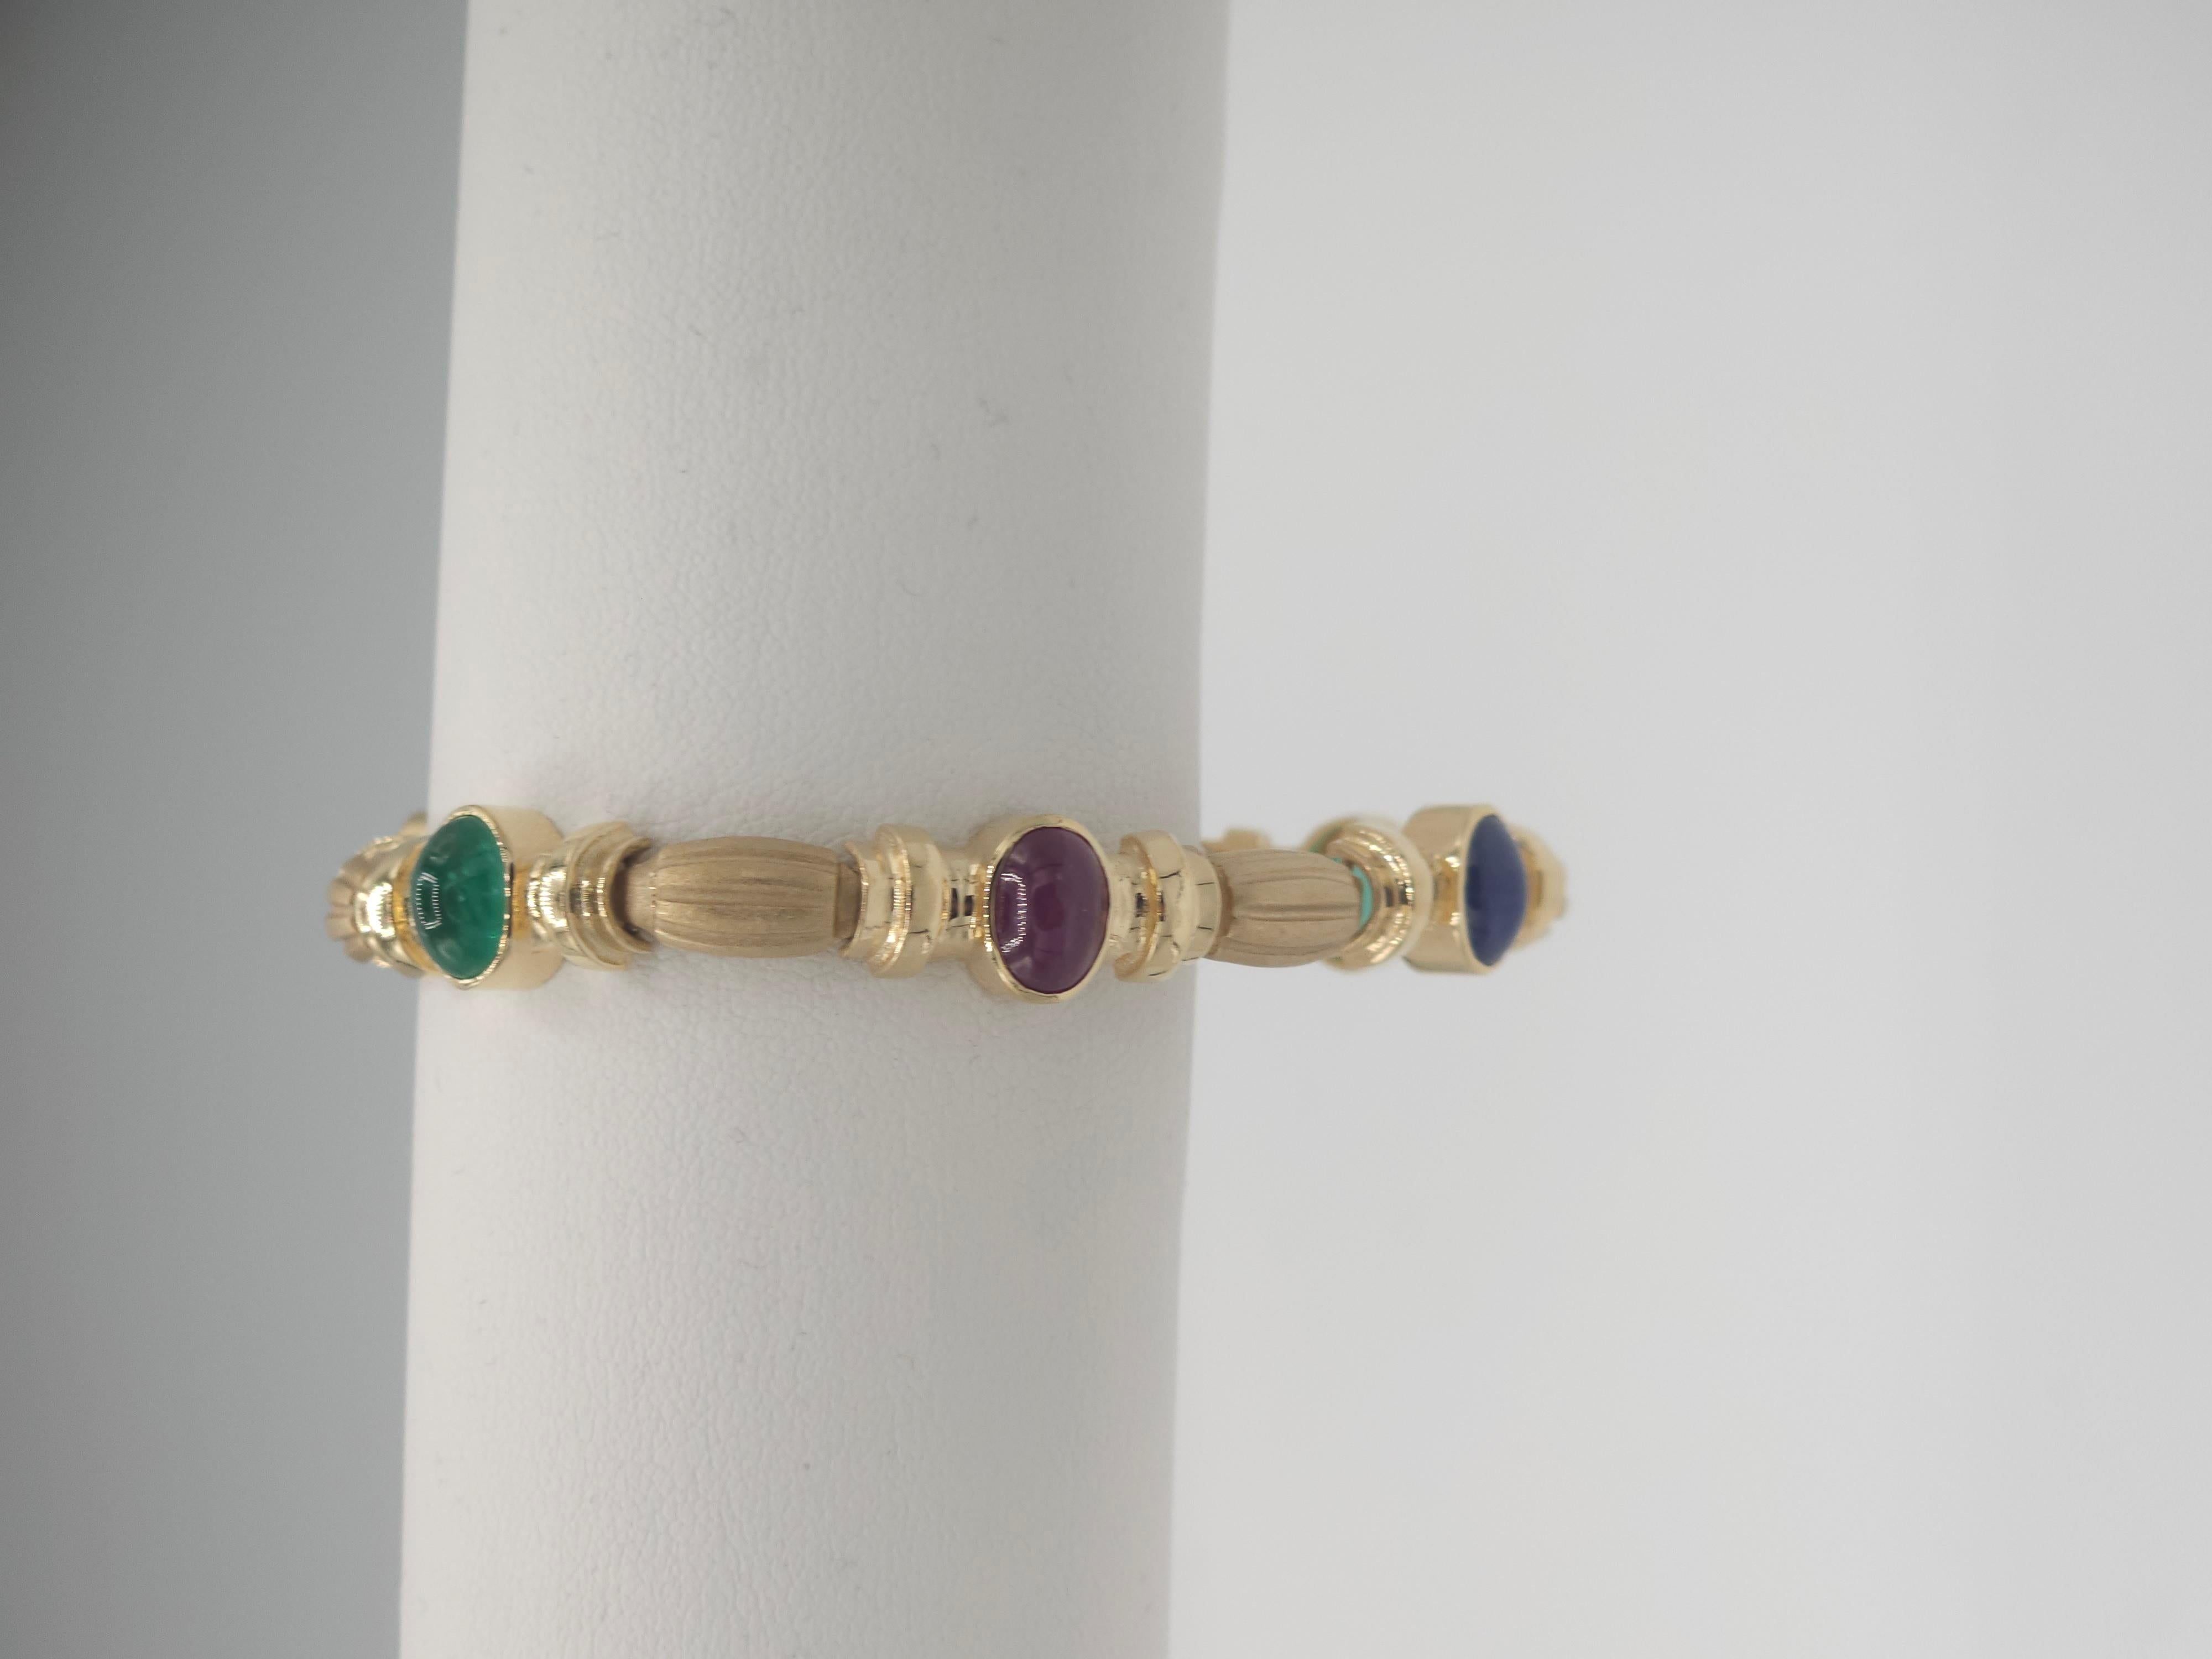 NEW Natural Ruby, Sapphire, Emerald Bracelet in 14k Solid Yellow Gold New For Sale 10